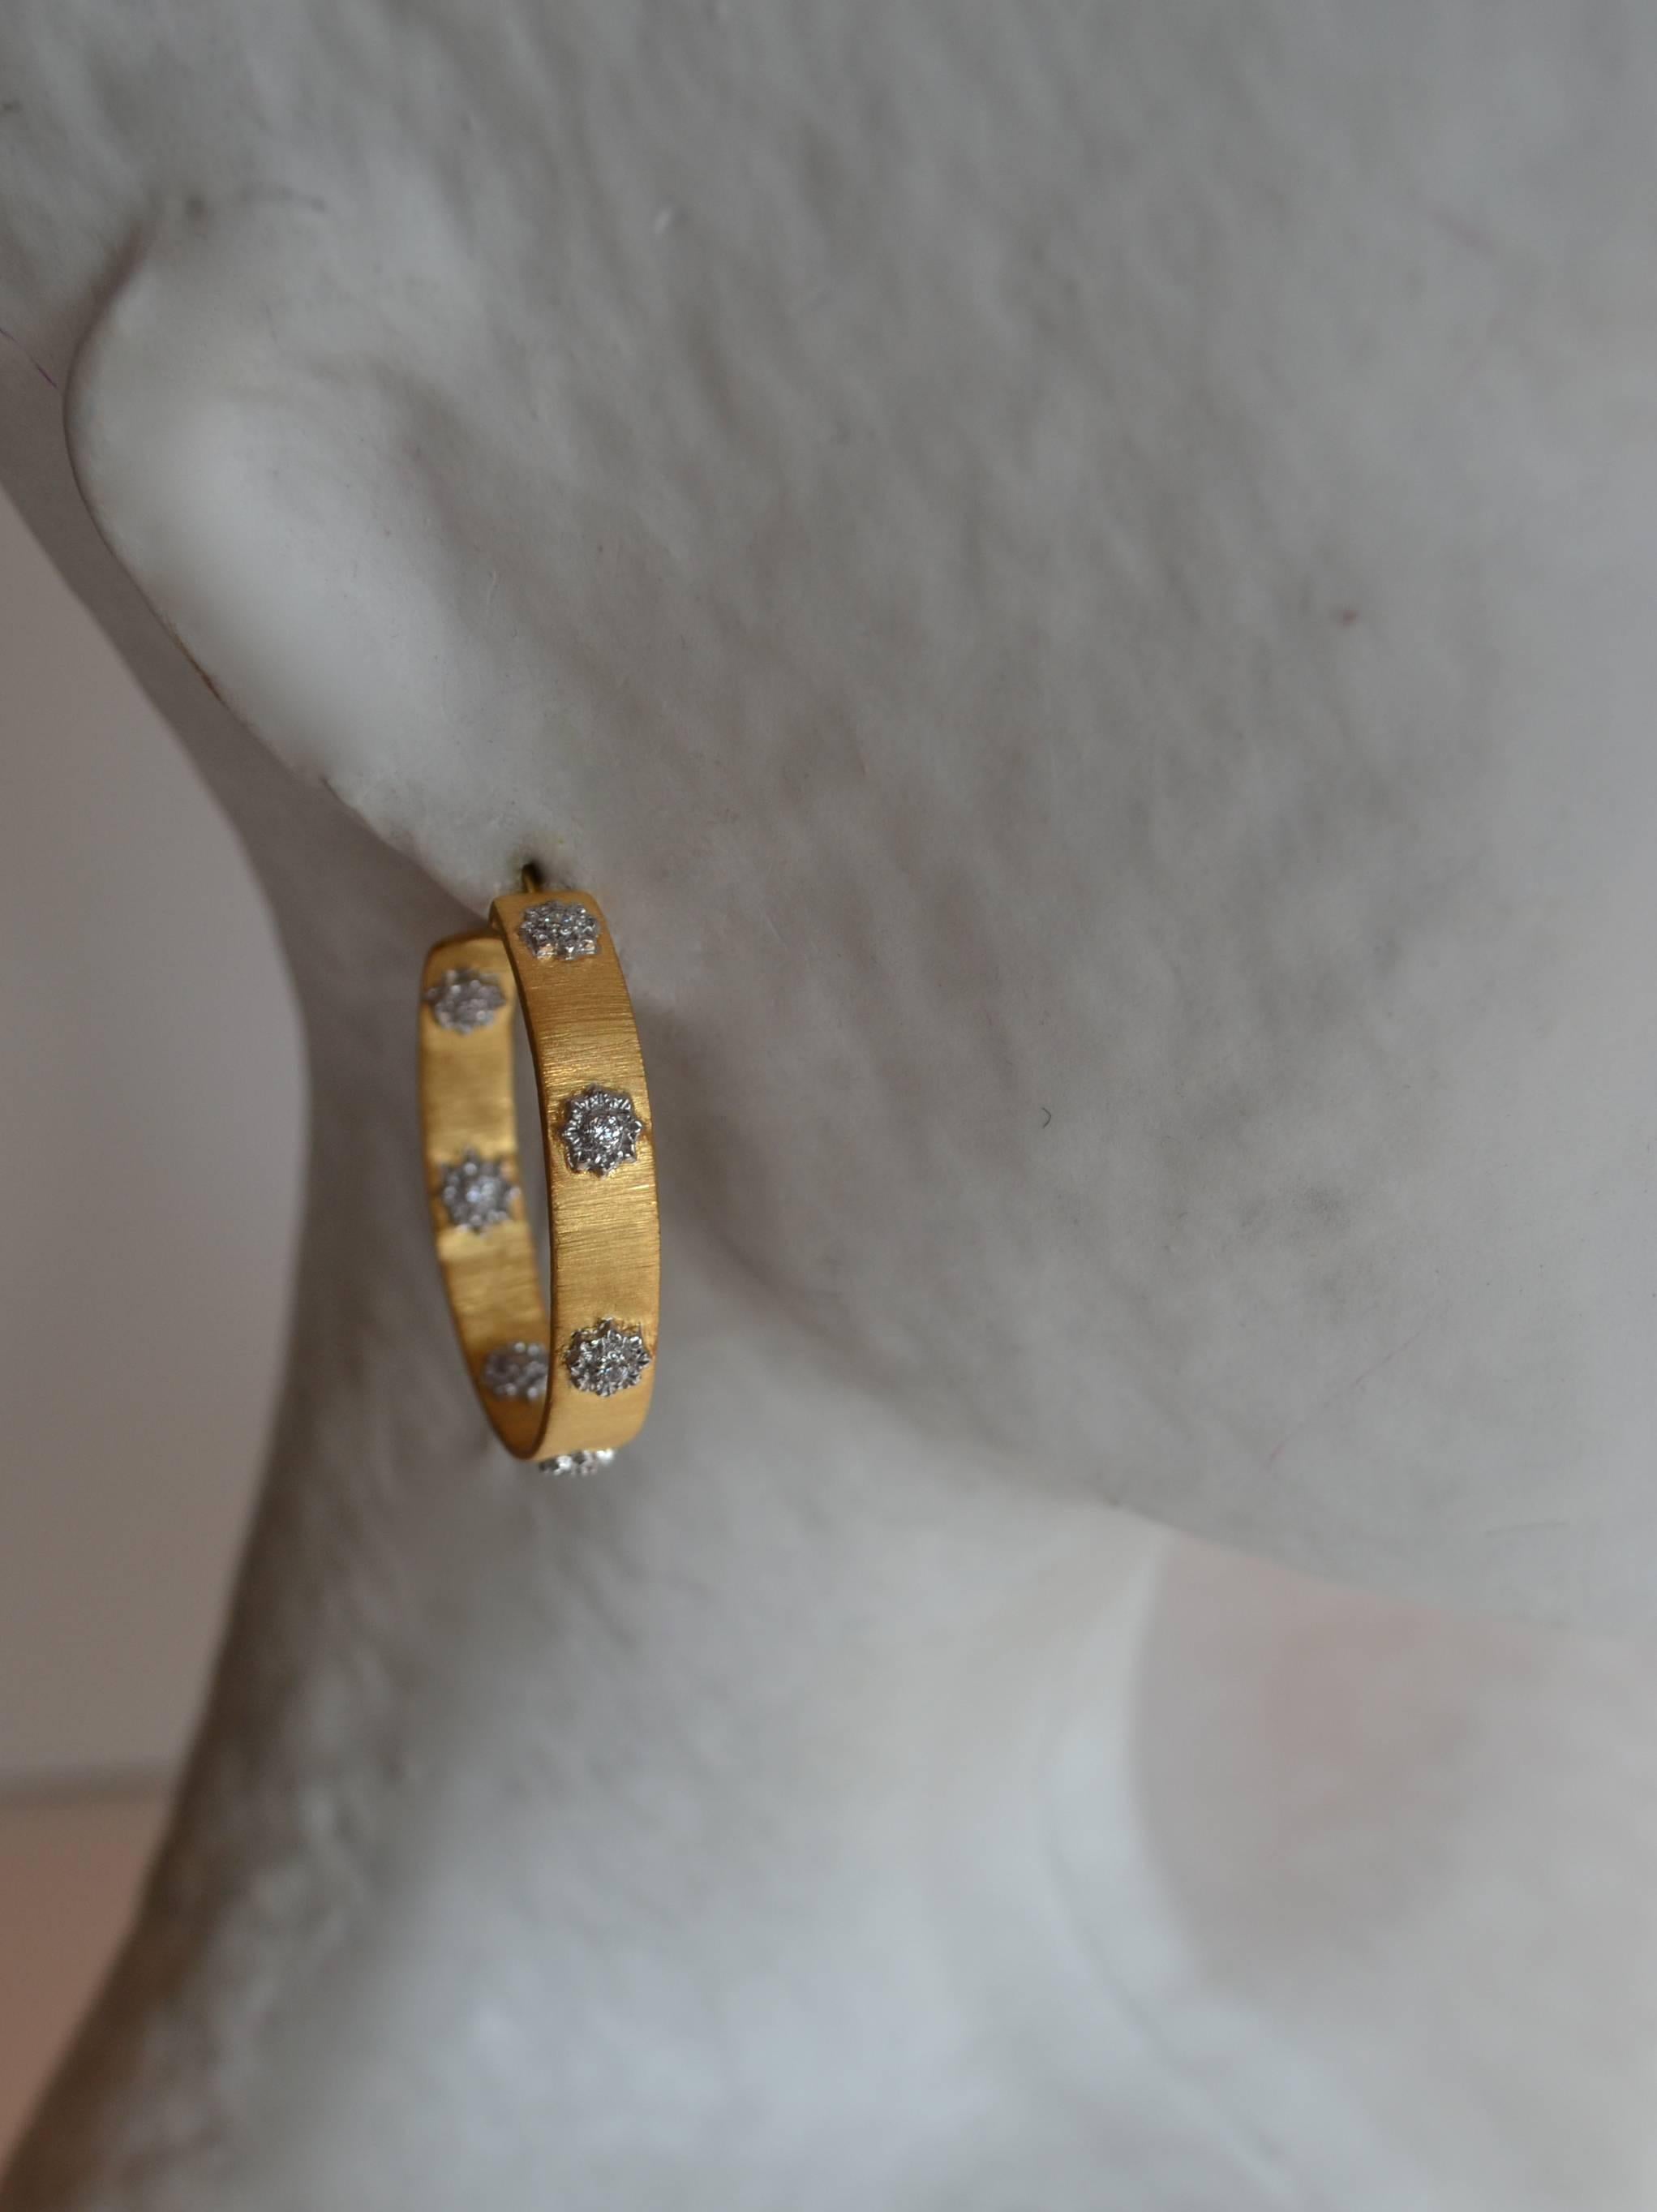 Pierced hoop earrings in gold and rhodium plate with gorgeous flower pattern and cubic zirconia detail. Made by Bijoux Num. 

